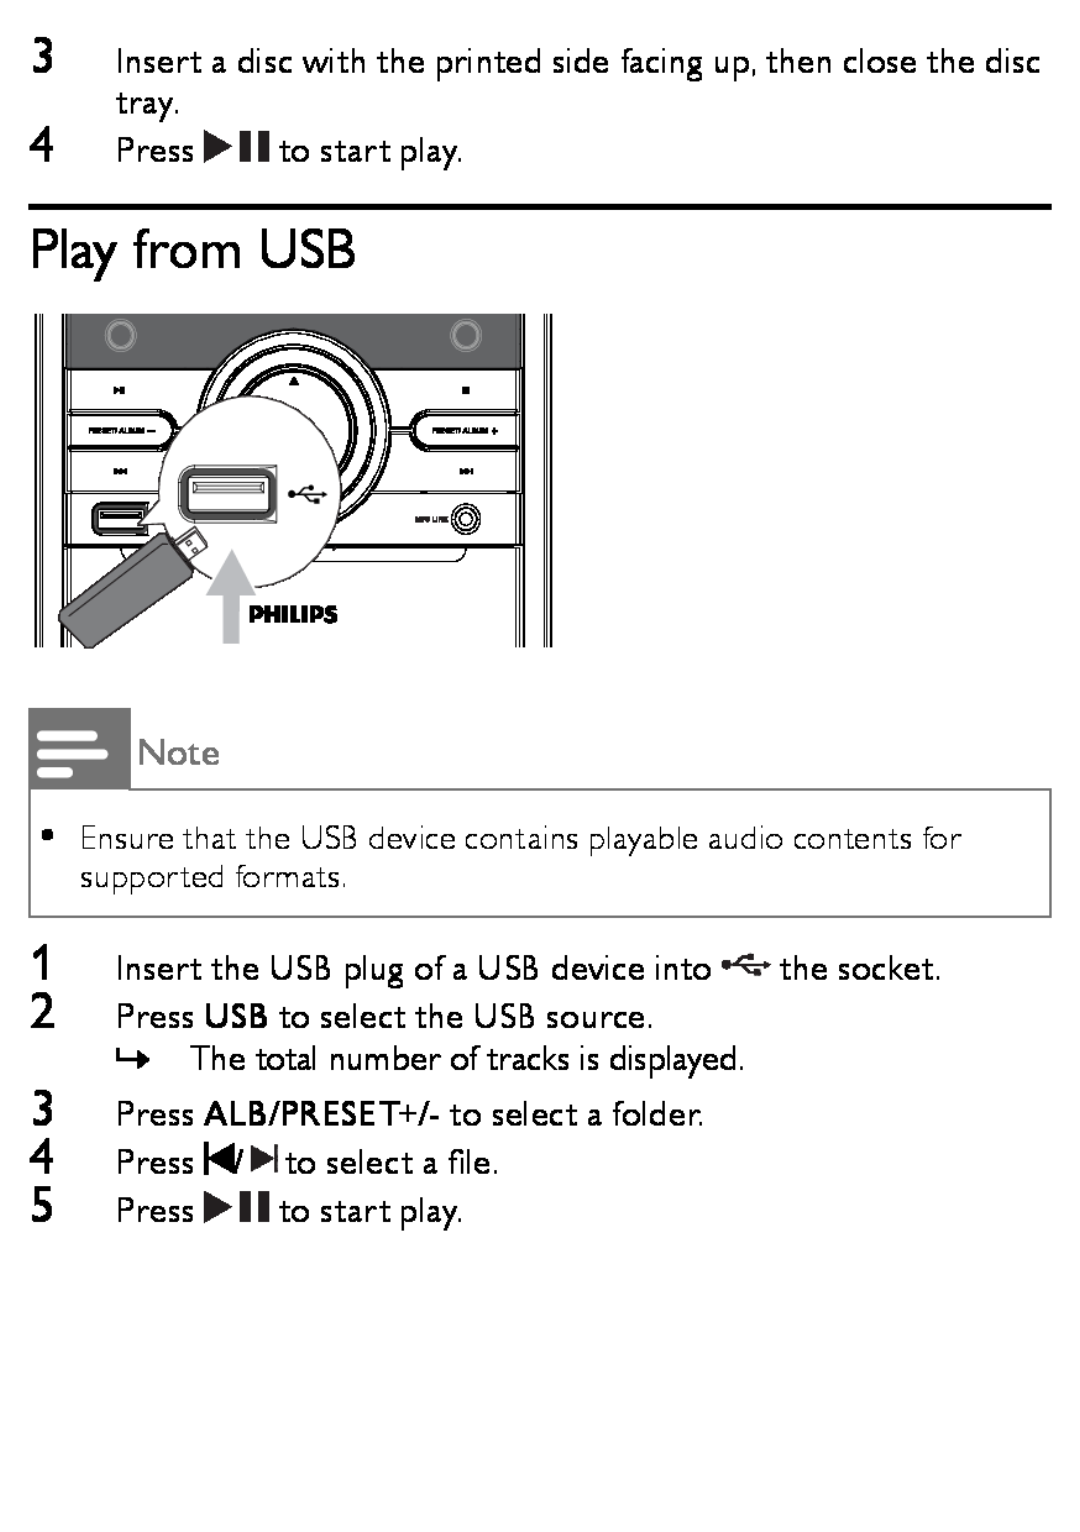 Philips MCM166 user manual Play from USB, 4Press to start play, 2Press USB to select the USB source 